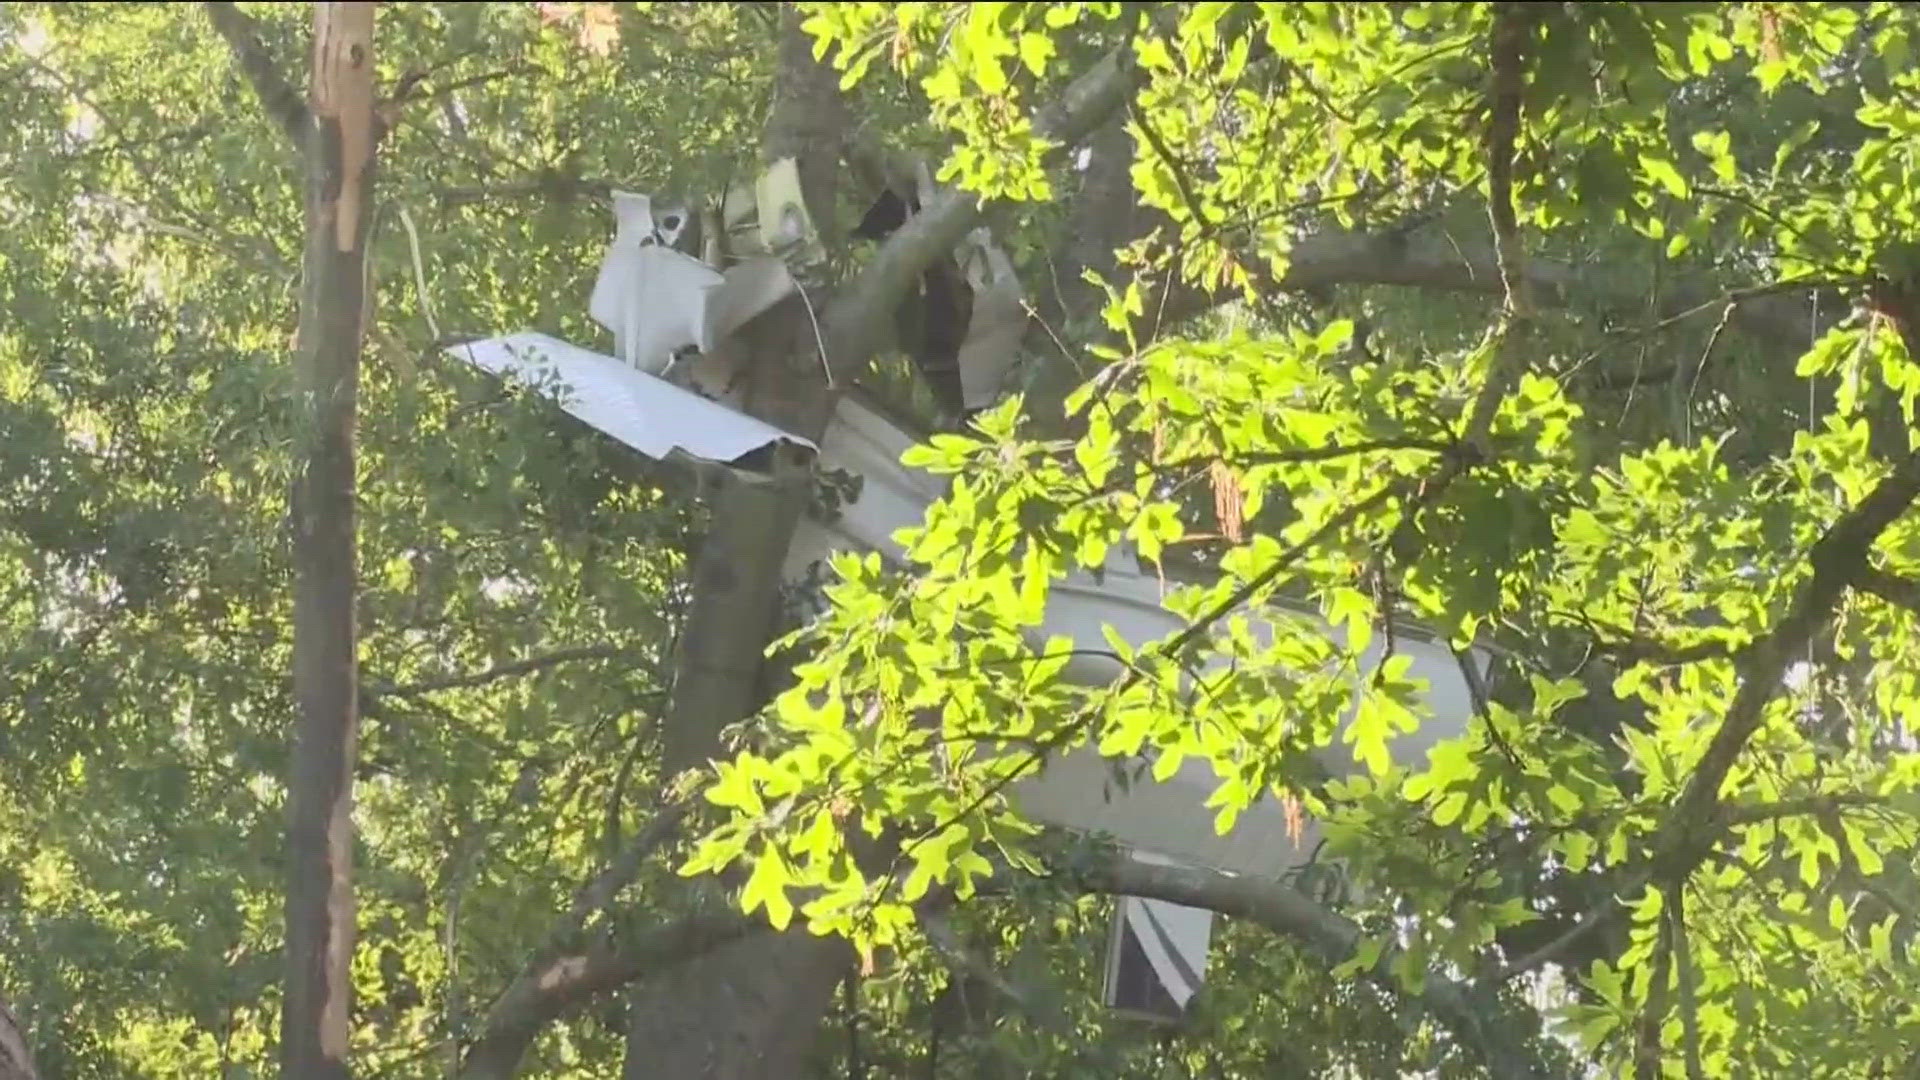 A pilot is dead after a small plane crashed in an Augusta neighborhood Thursday morning.